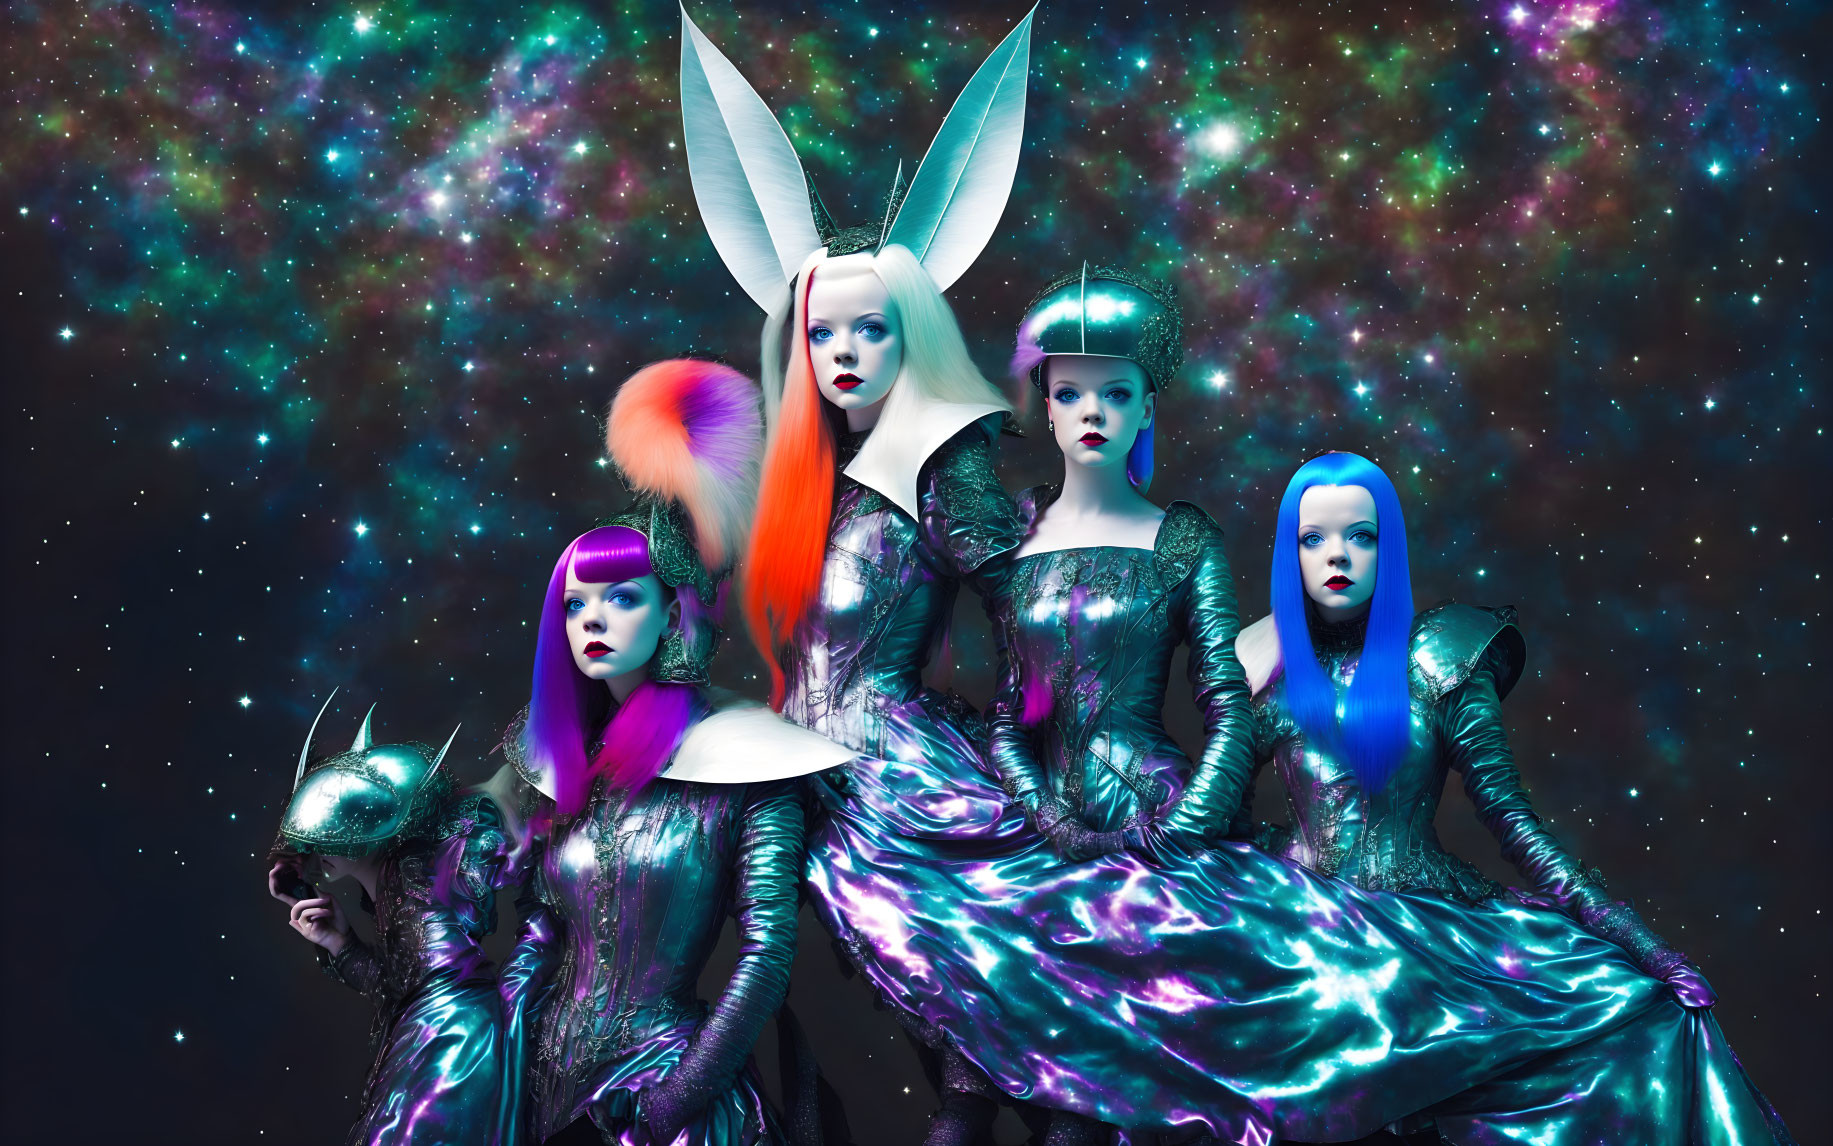 Four models in avant-garde makeup and outfits against galaxy backdrop